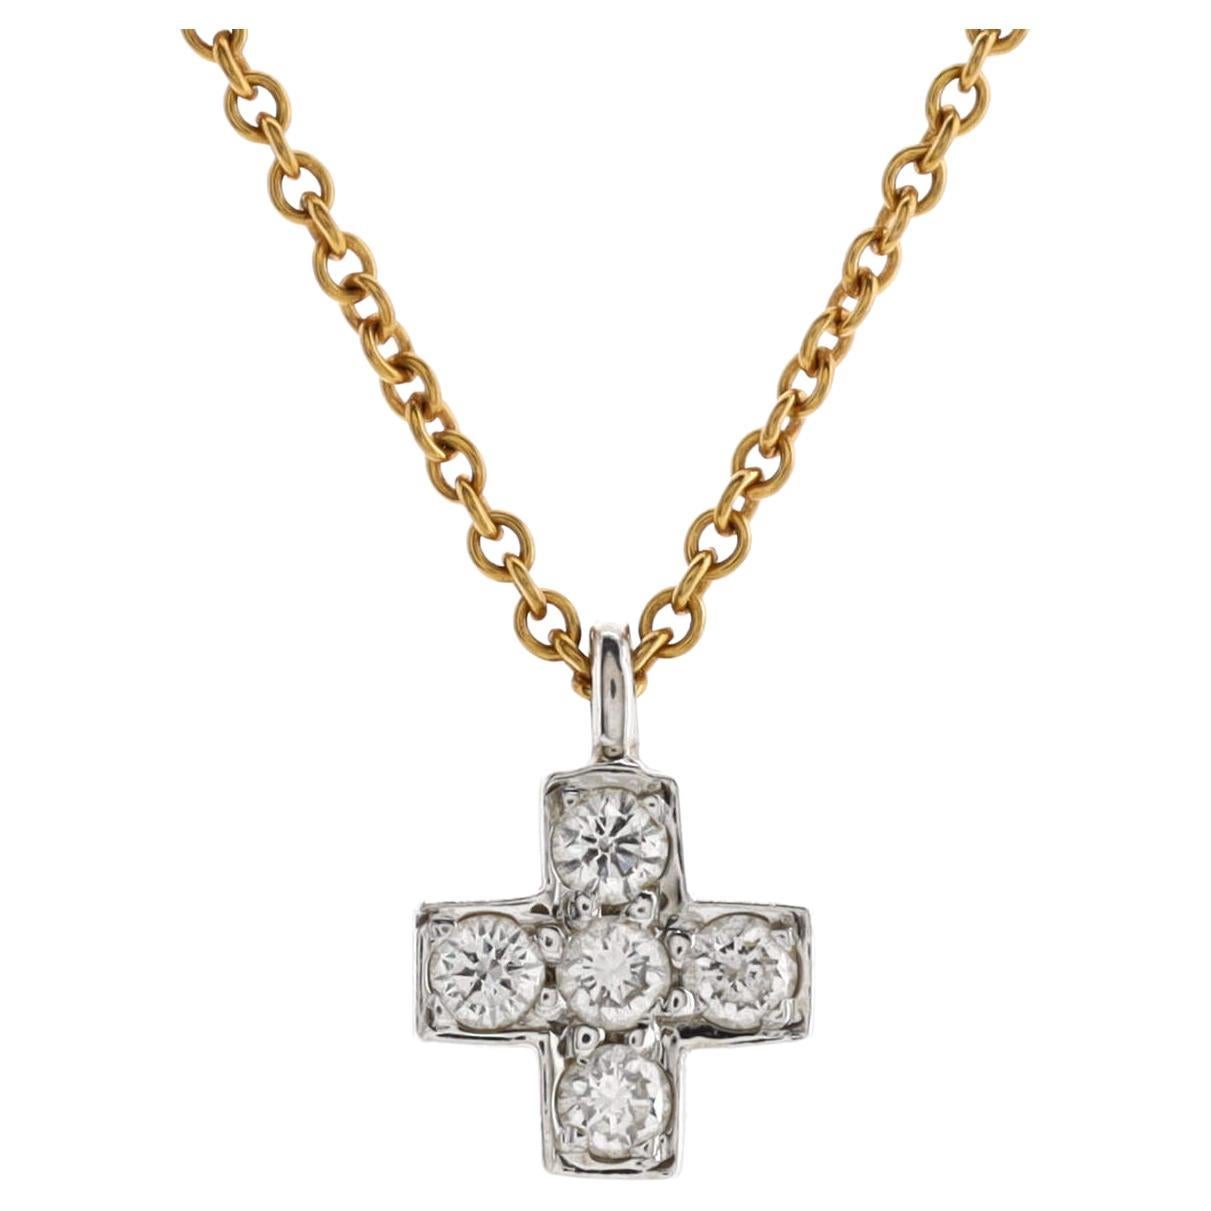 Tiffany & Co. Cruciform Cross Pendant Necklace 18K Yellow Gold and Platin For Sale